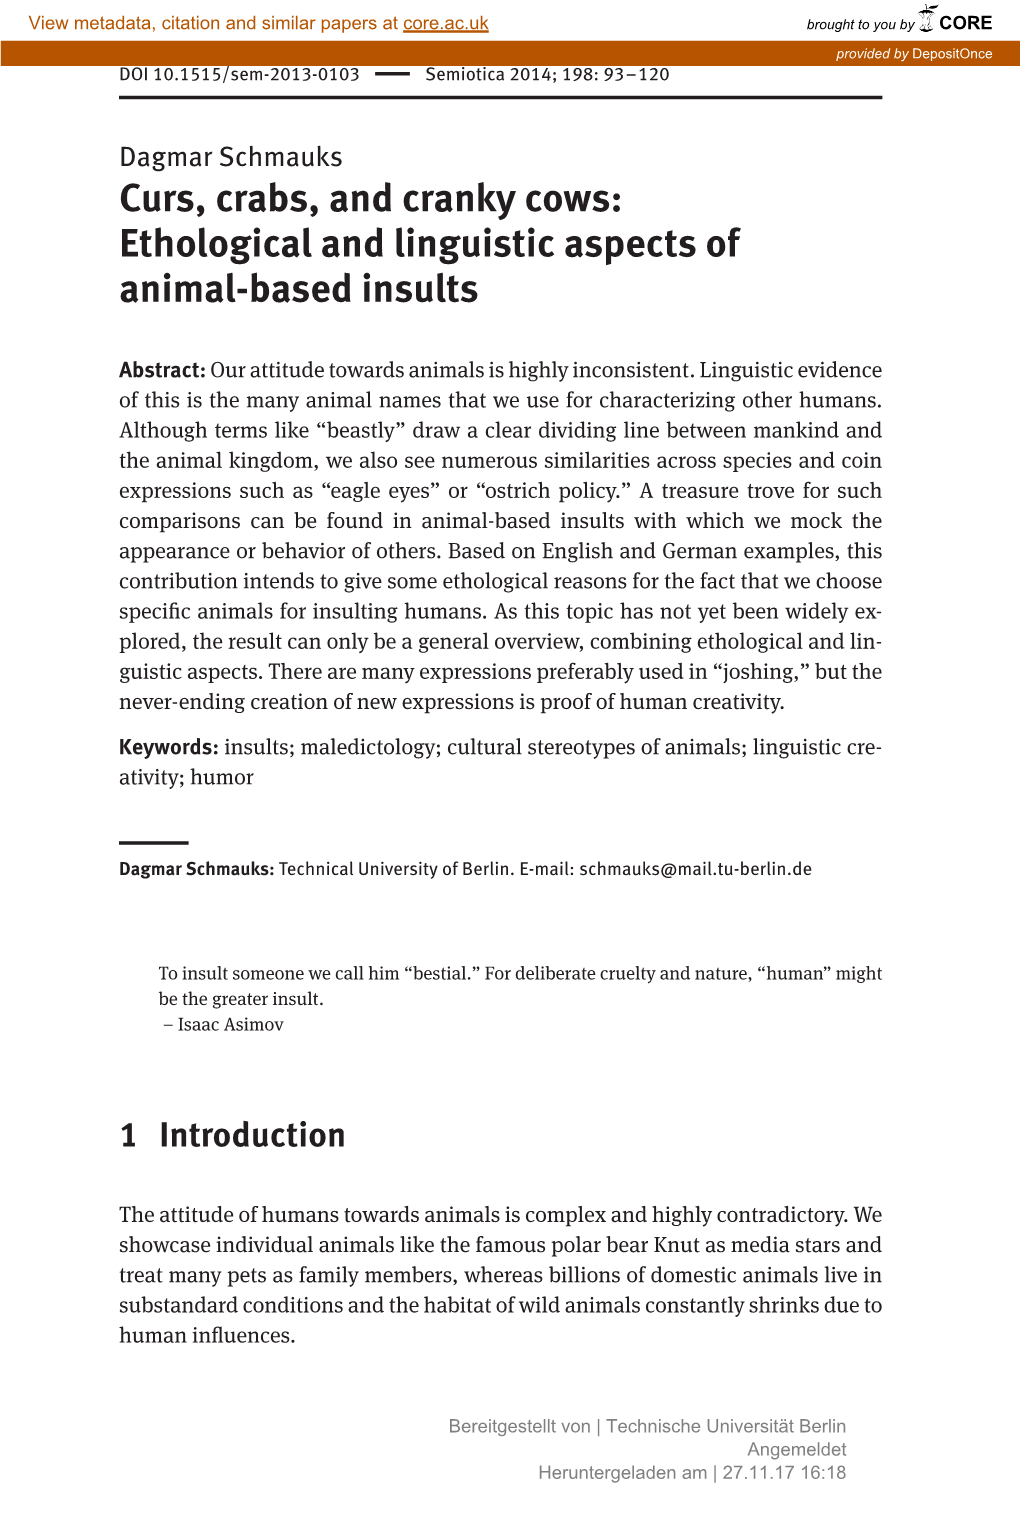 Ethological and Linguistic Aspects of Animal-Based Insults